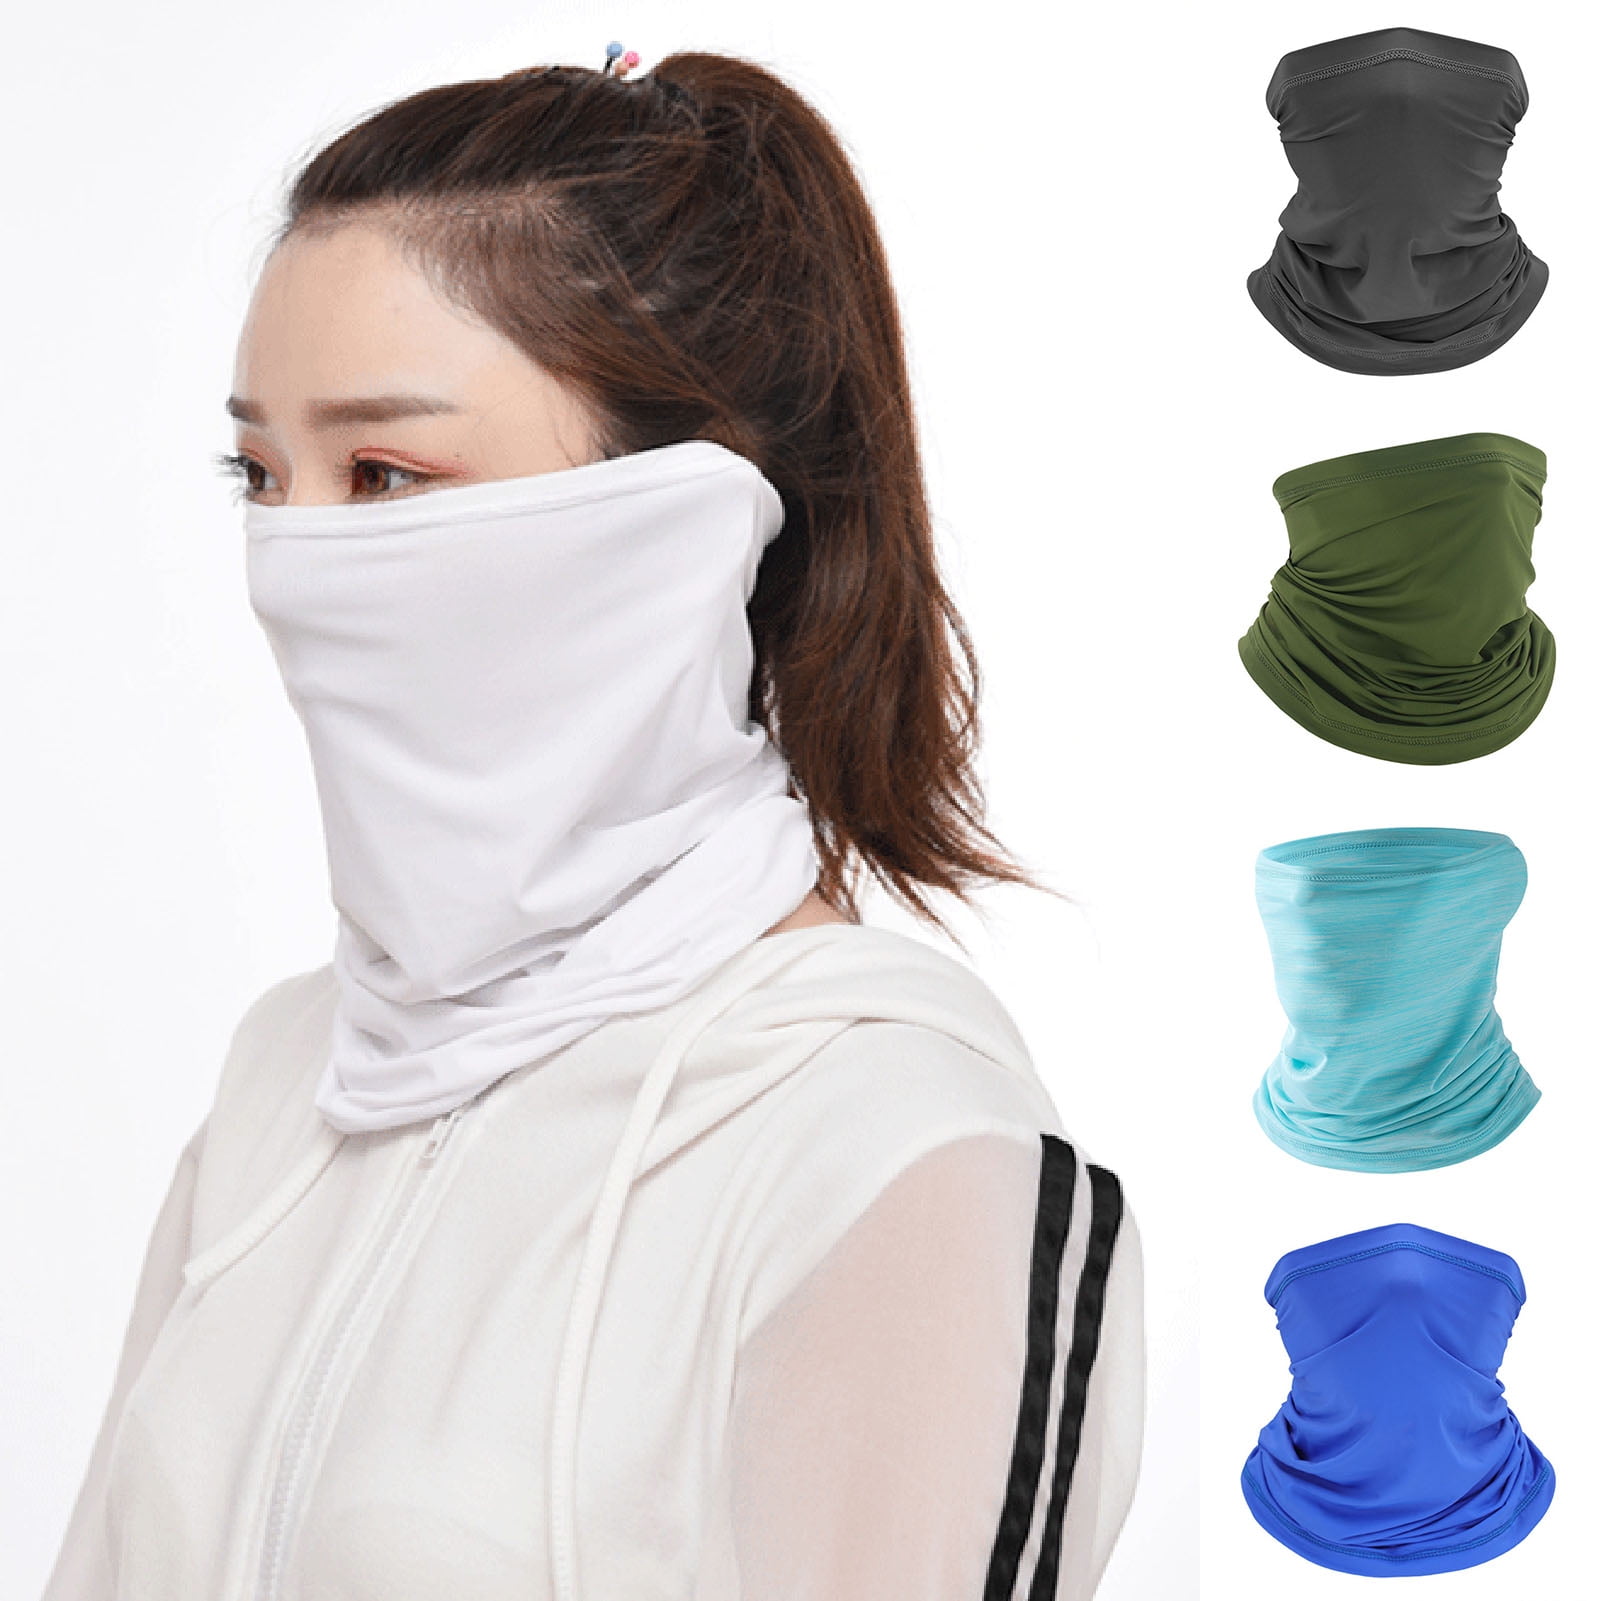 Running Face cover Neck gaiter 1pcs Cycling Riding Scarf UV protection 